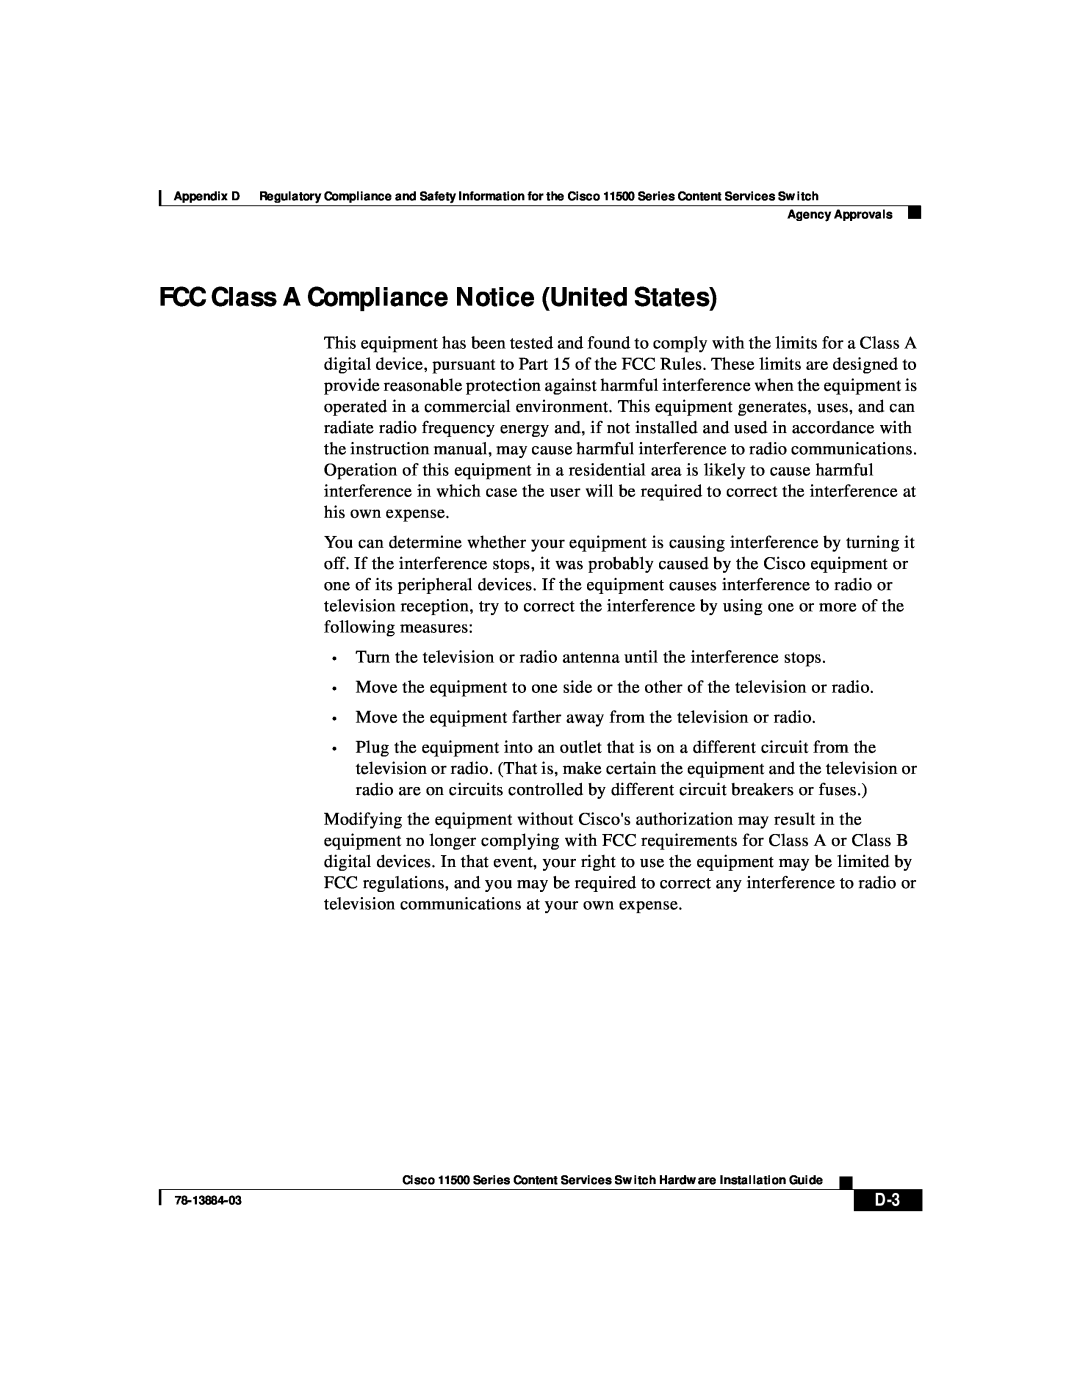 Cisco Systems 11500 Series manual FCC Class A Compliance Notice United States 